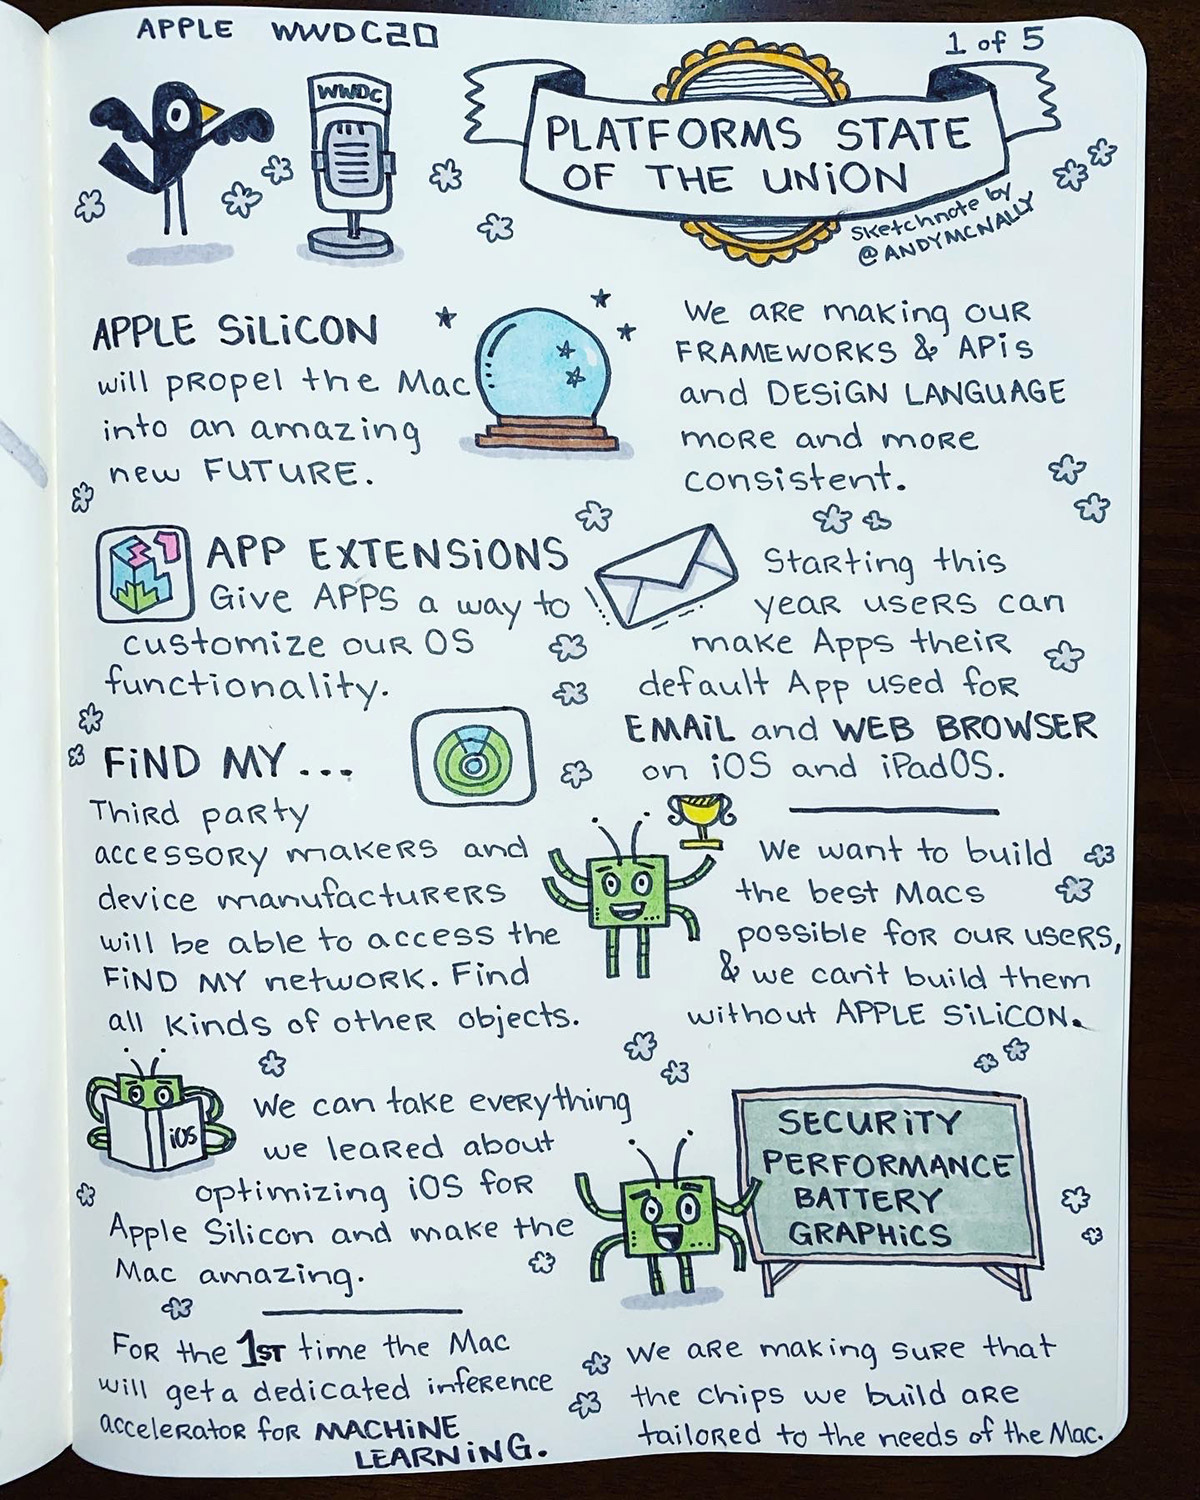 Apple Platforms State of the Union - WWDC 2020 drawing 1 of 5